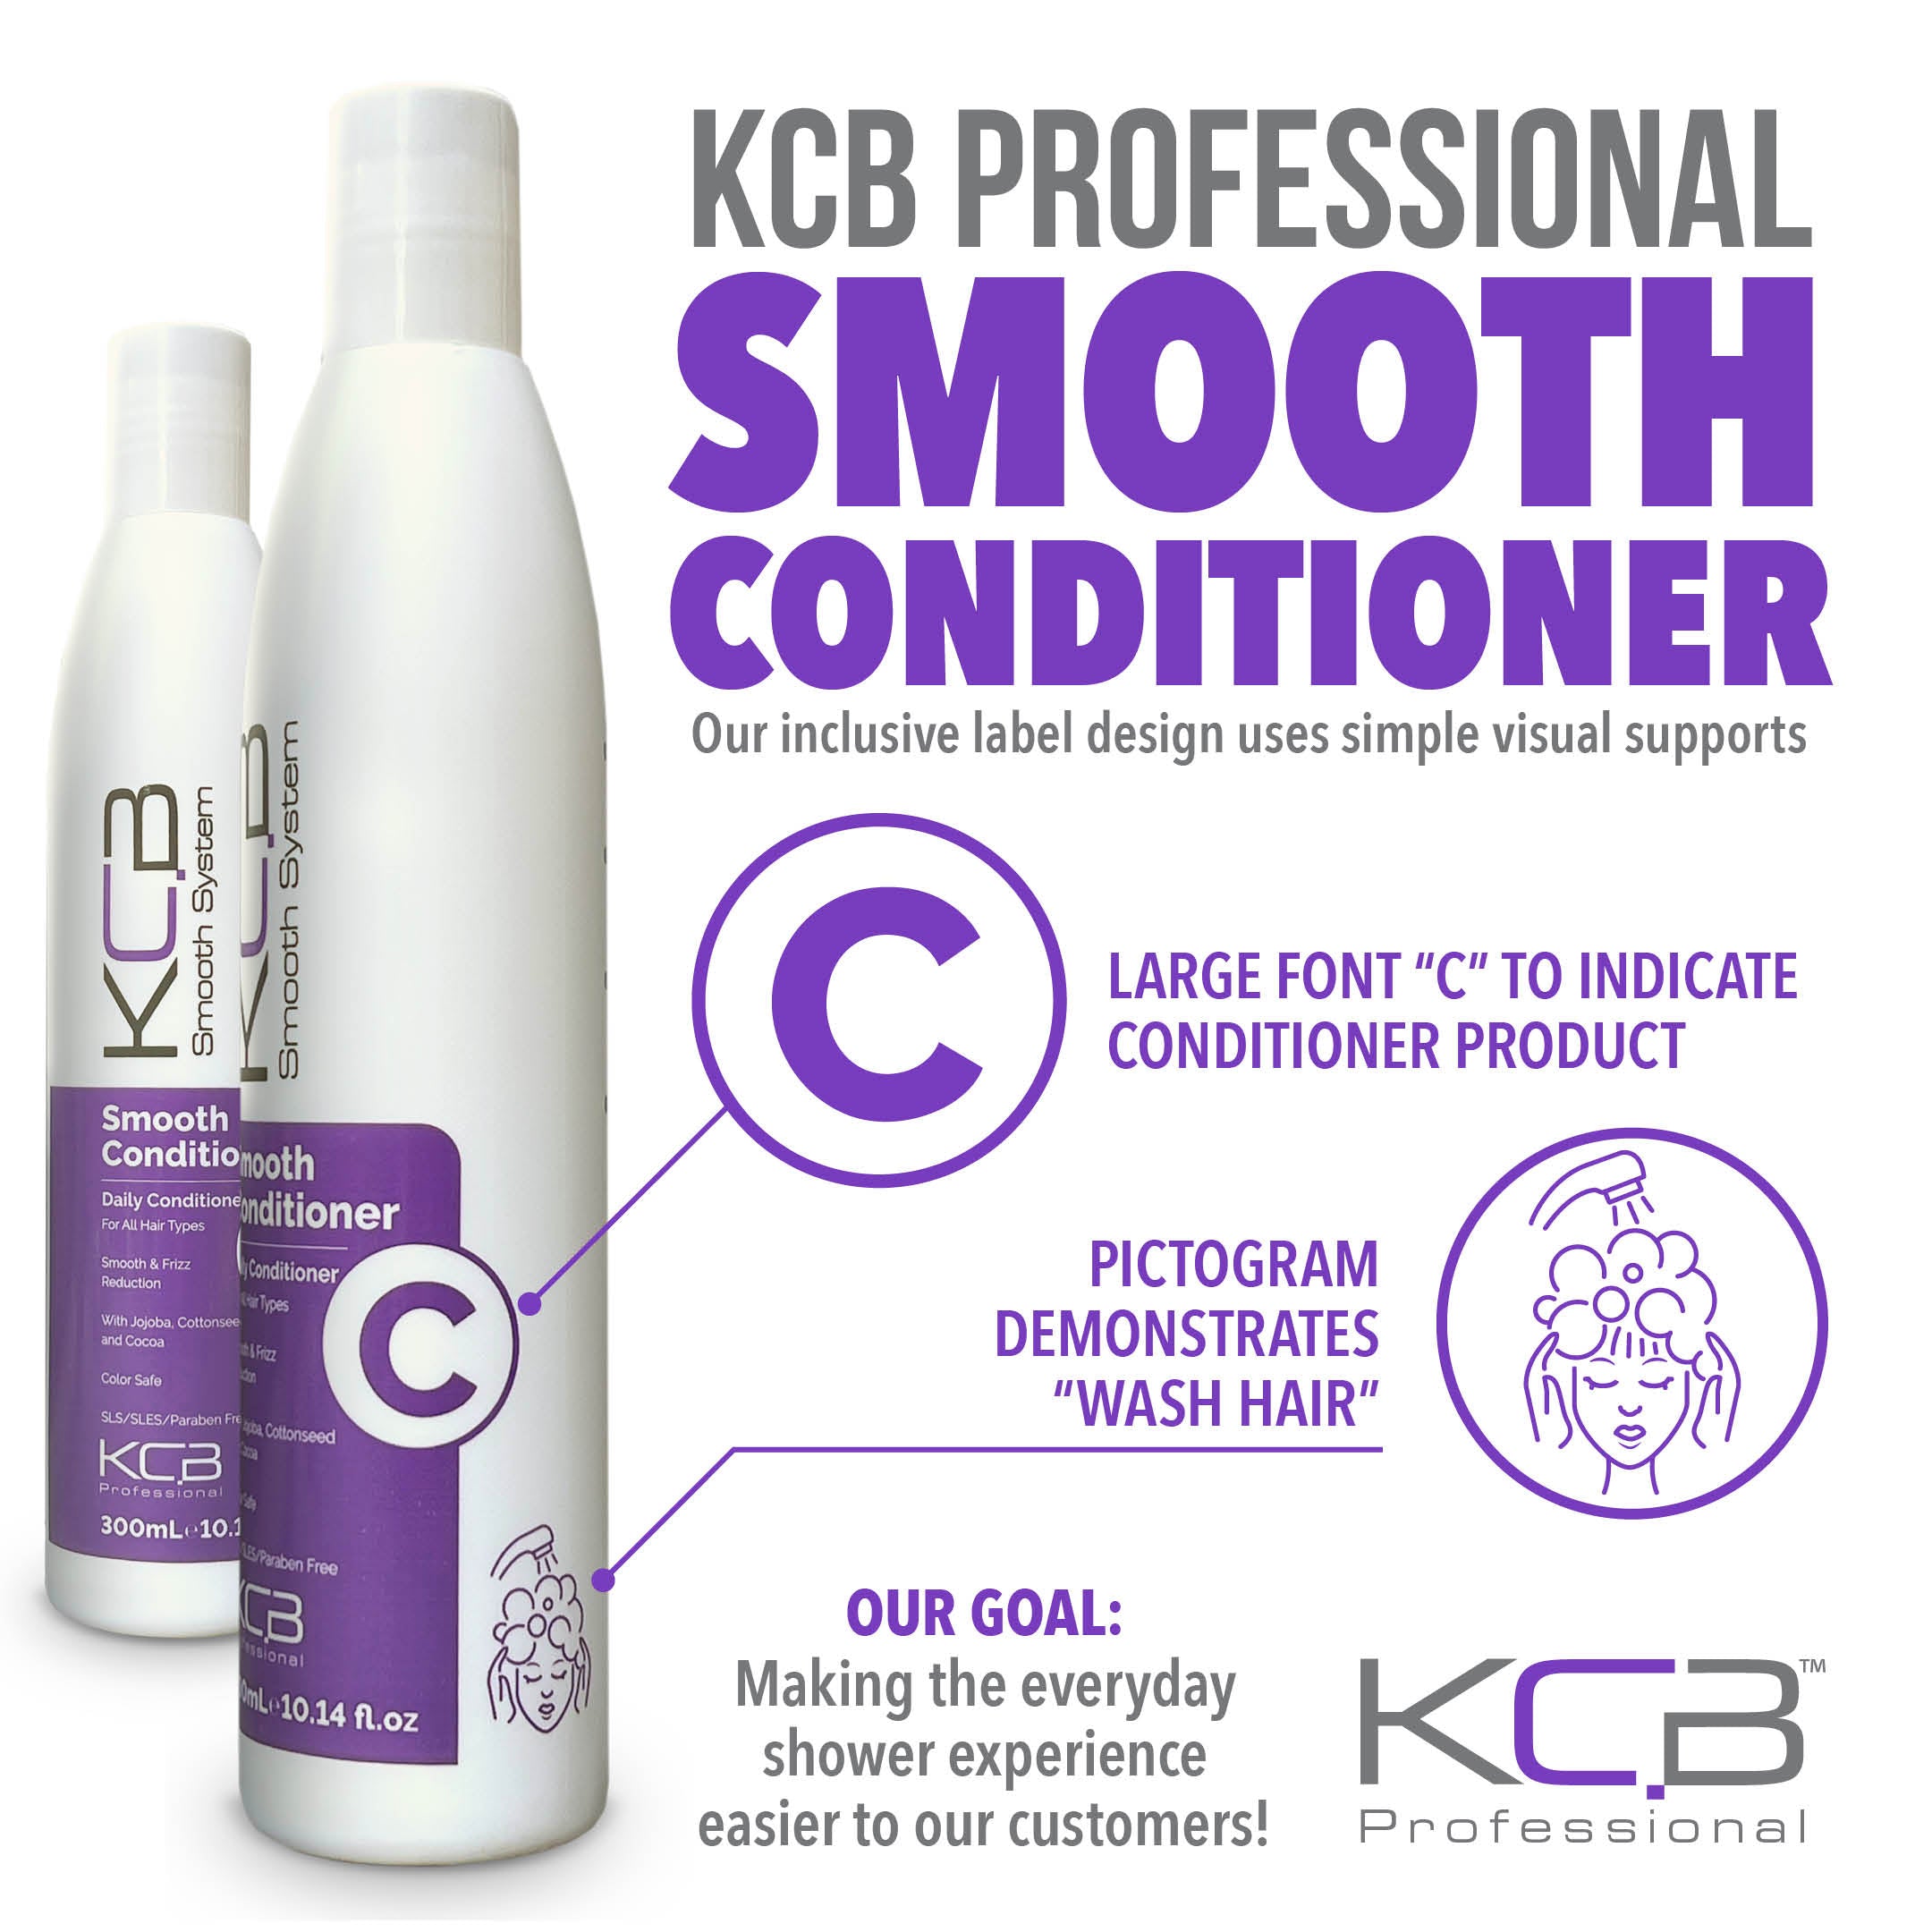 KCB Professional Smooth Conditioner for Smoothing and Hair Frizz Control. Nourishes, Revitalizes, Detangle, All Hair Types, 10.14 Fl oz / 300ml. Enriched with Jojoba Oil, Coconut and Cocoa Butter.